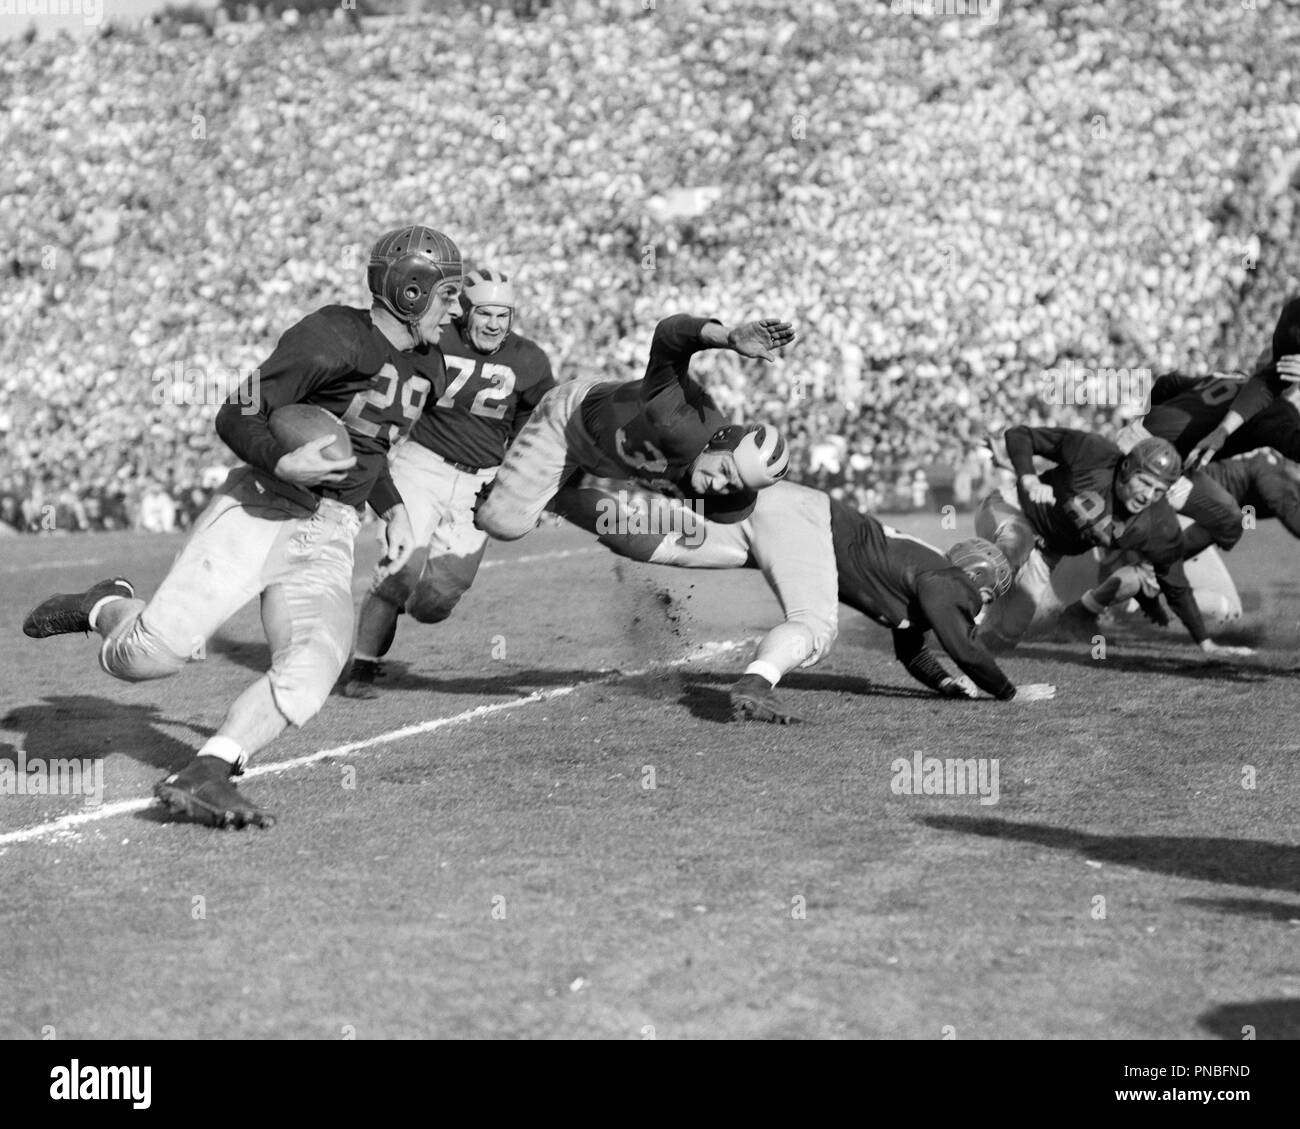 1930s LEATHER HELMET COLLEGE FOOTBALL TEAMS PLAYING MAN RUNNING CARRYING THE BALL - ap008521 CAM001 HARS PLAYERS SPECTATORS B&W GOALS STRATEGY UNIVERSITIES EXCITEMENT CAM001 HIGHER EDUCATION ATHLETES COLLEGES COOPERATION TEAMS TOGETHERNESS YOUNG ADULT MAN AMERICAN FOOTBALL BLACK AND WHITE CAUCASIAN ETHNICITY DATED OLD FASHIONED Stock Photo